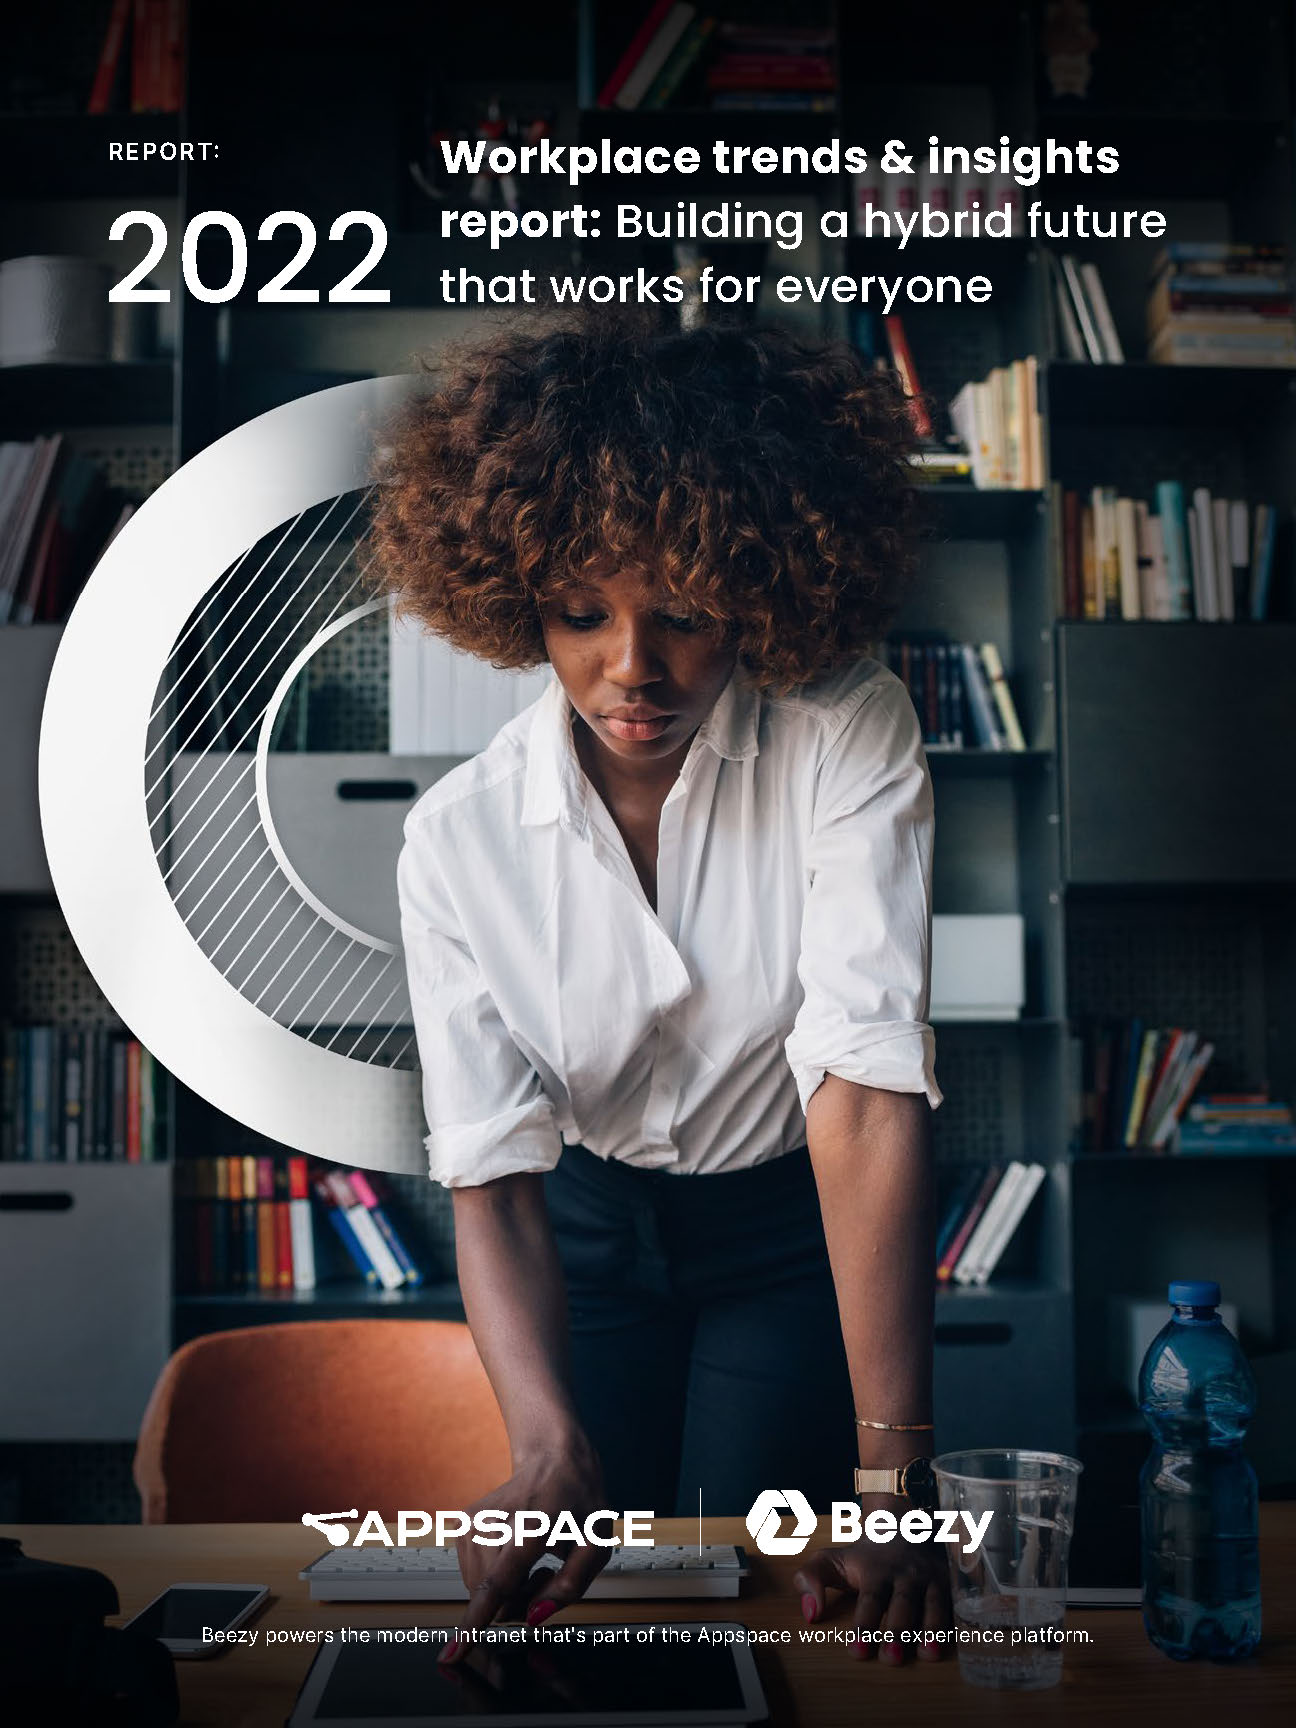 Appspace-Beezy 2022 Digital Workplace Trends and Insight Report Cover Image